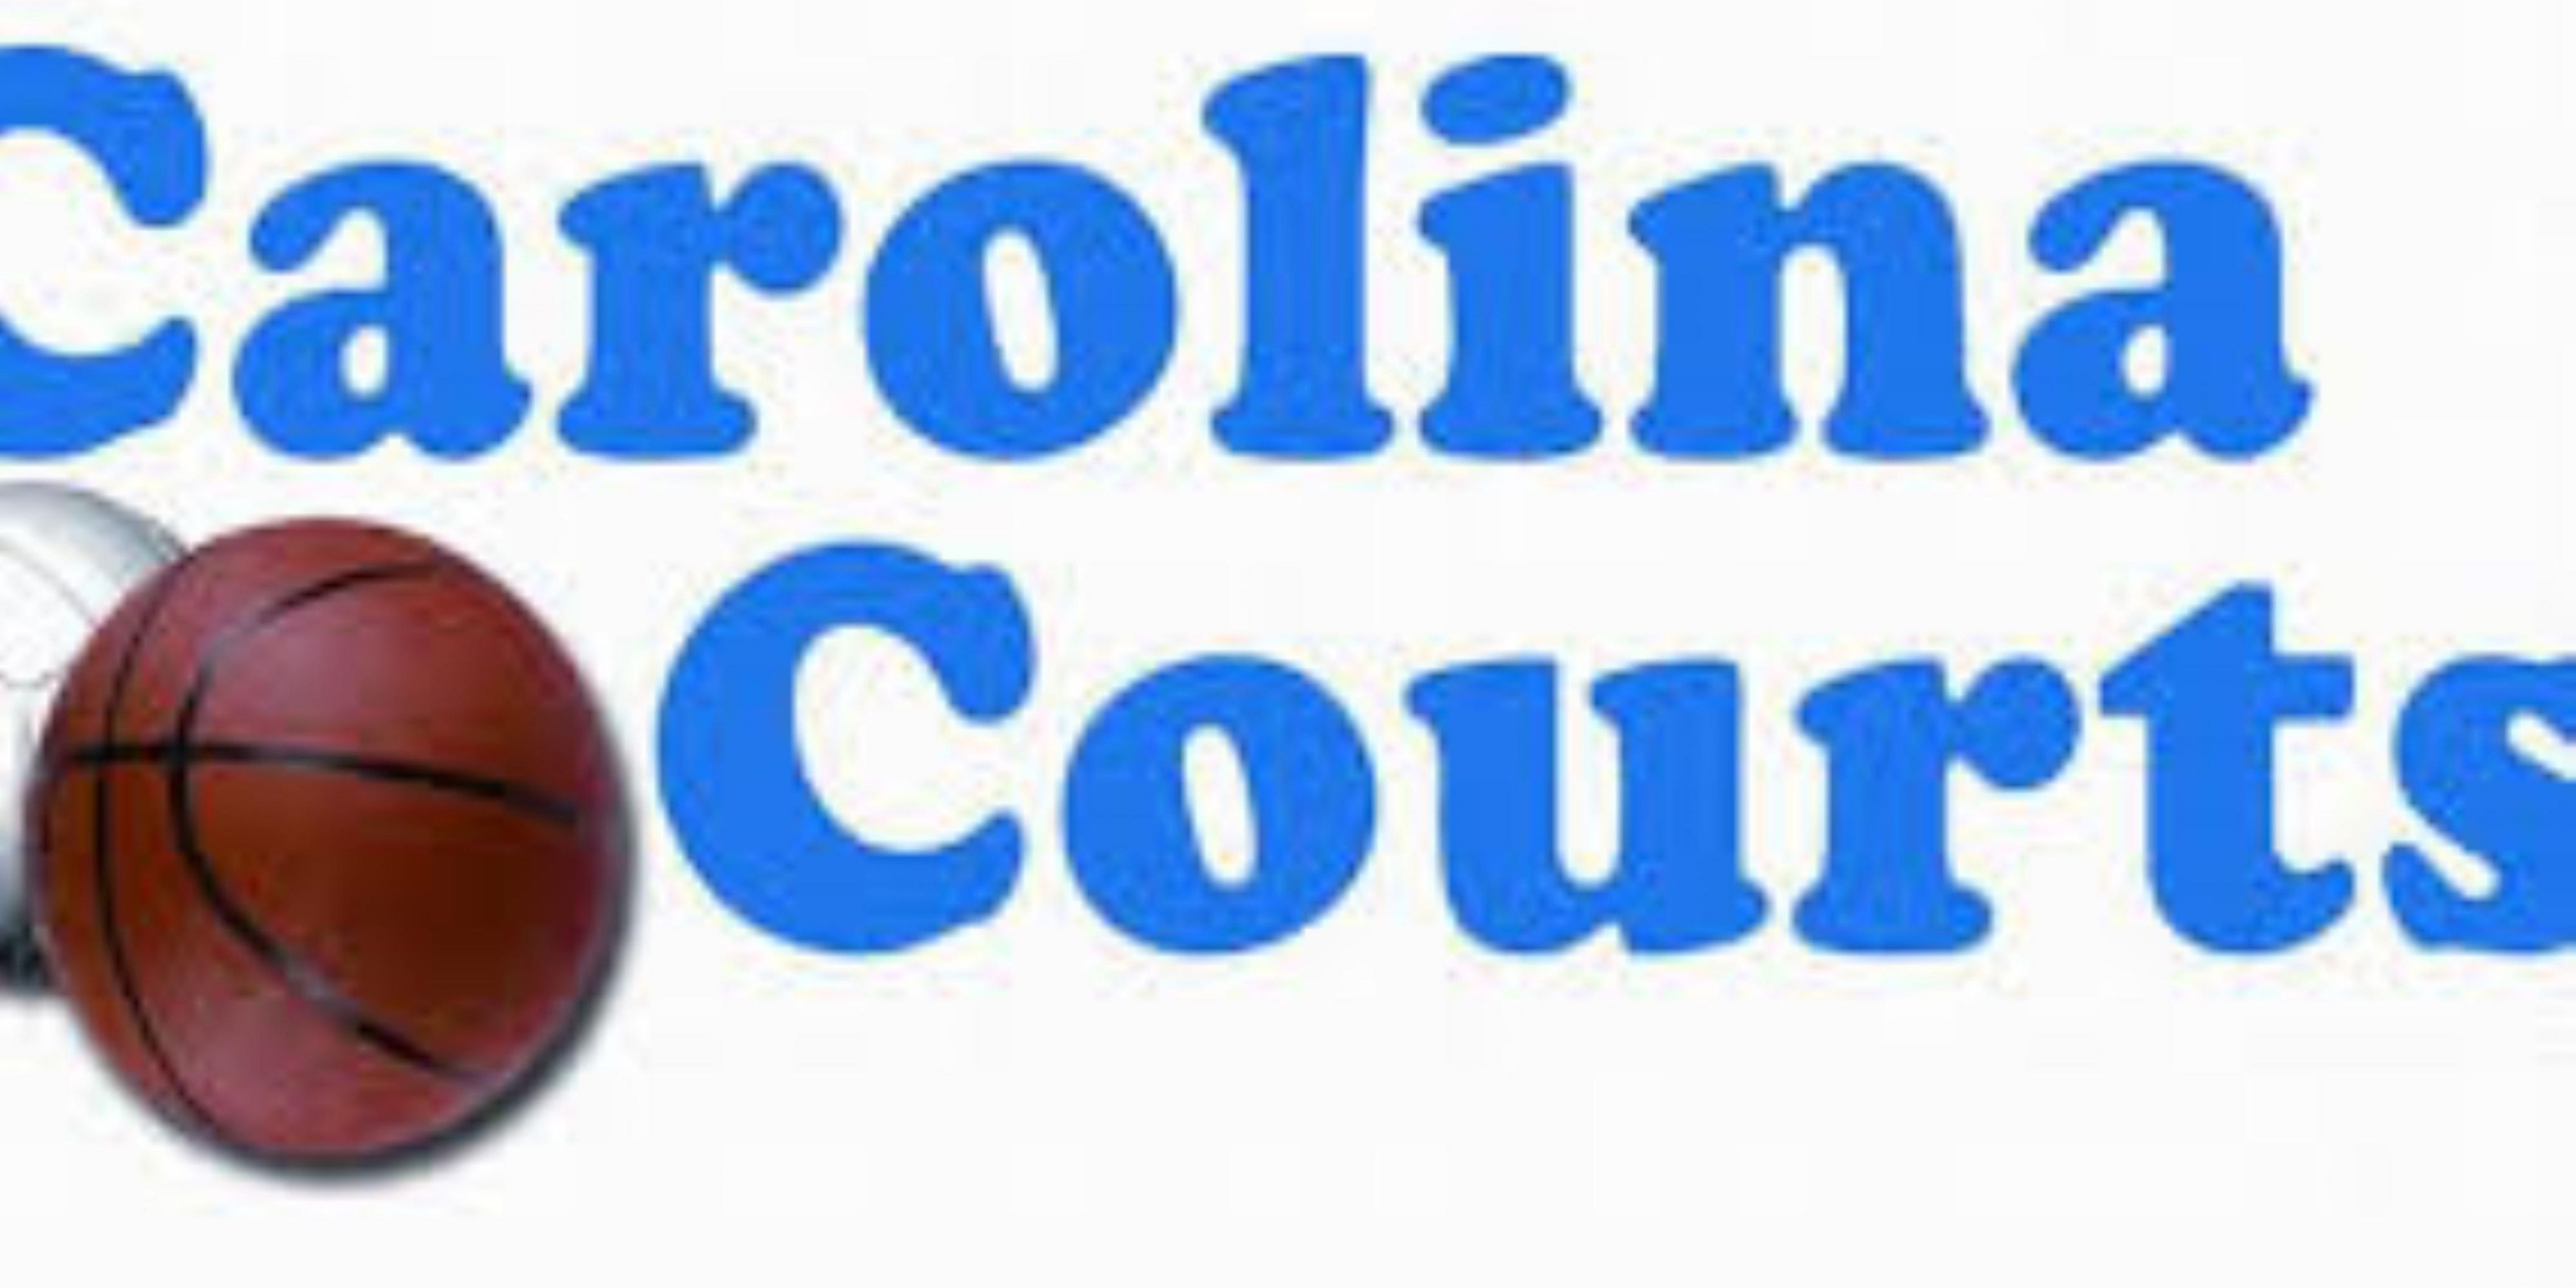 Carolina Courts is Charlotte's premier basketball, volleyball and pickleball facility. Offering year-round programs in two conveniently located facilities in Concord and Indian Trail, NC.